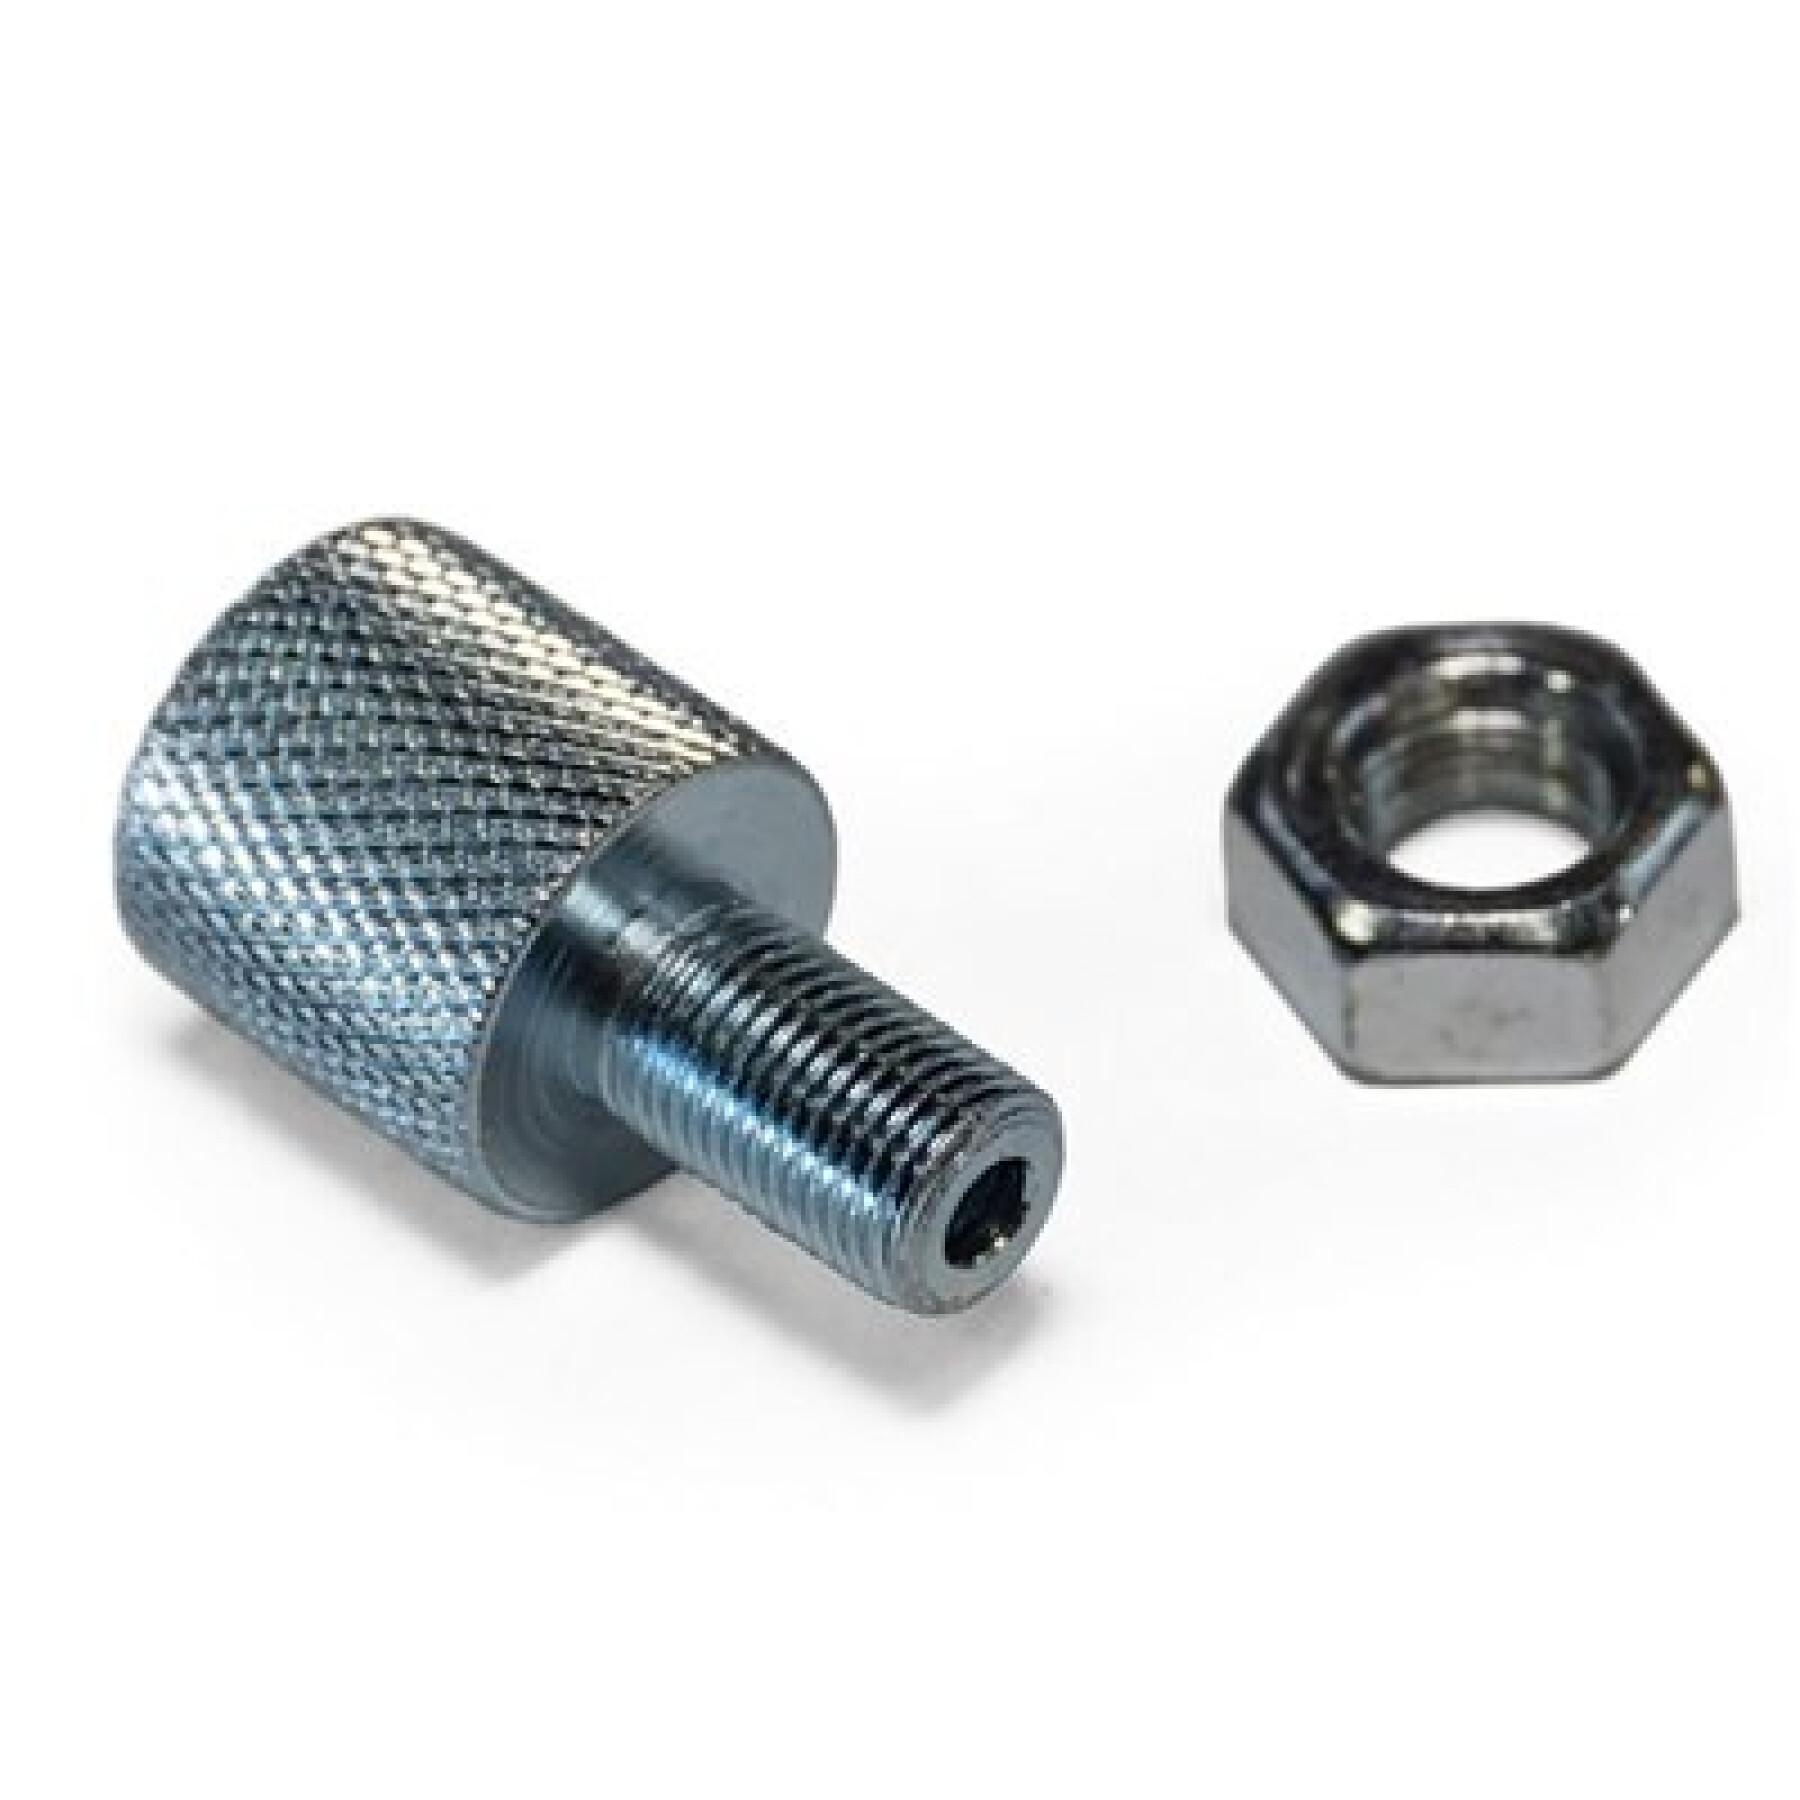 Security screw trailer axle with quick release Burley